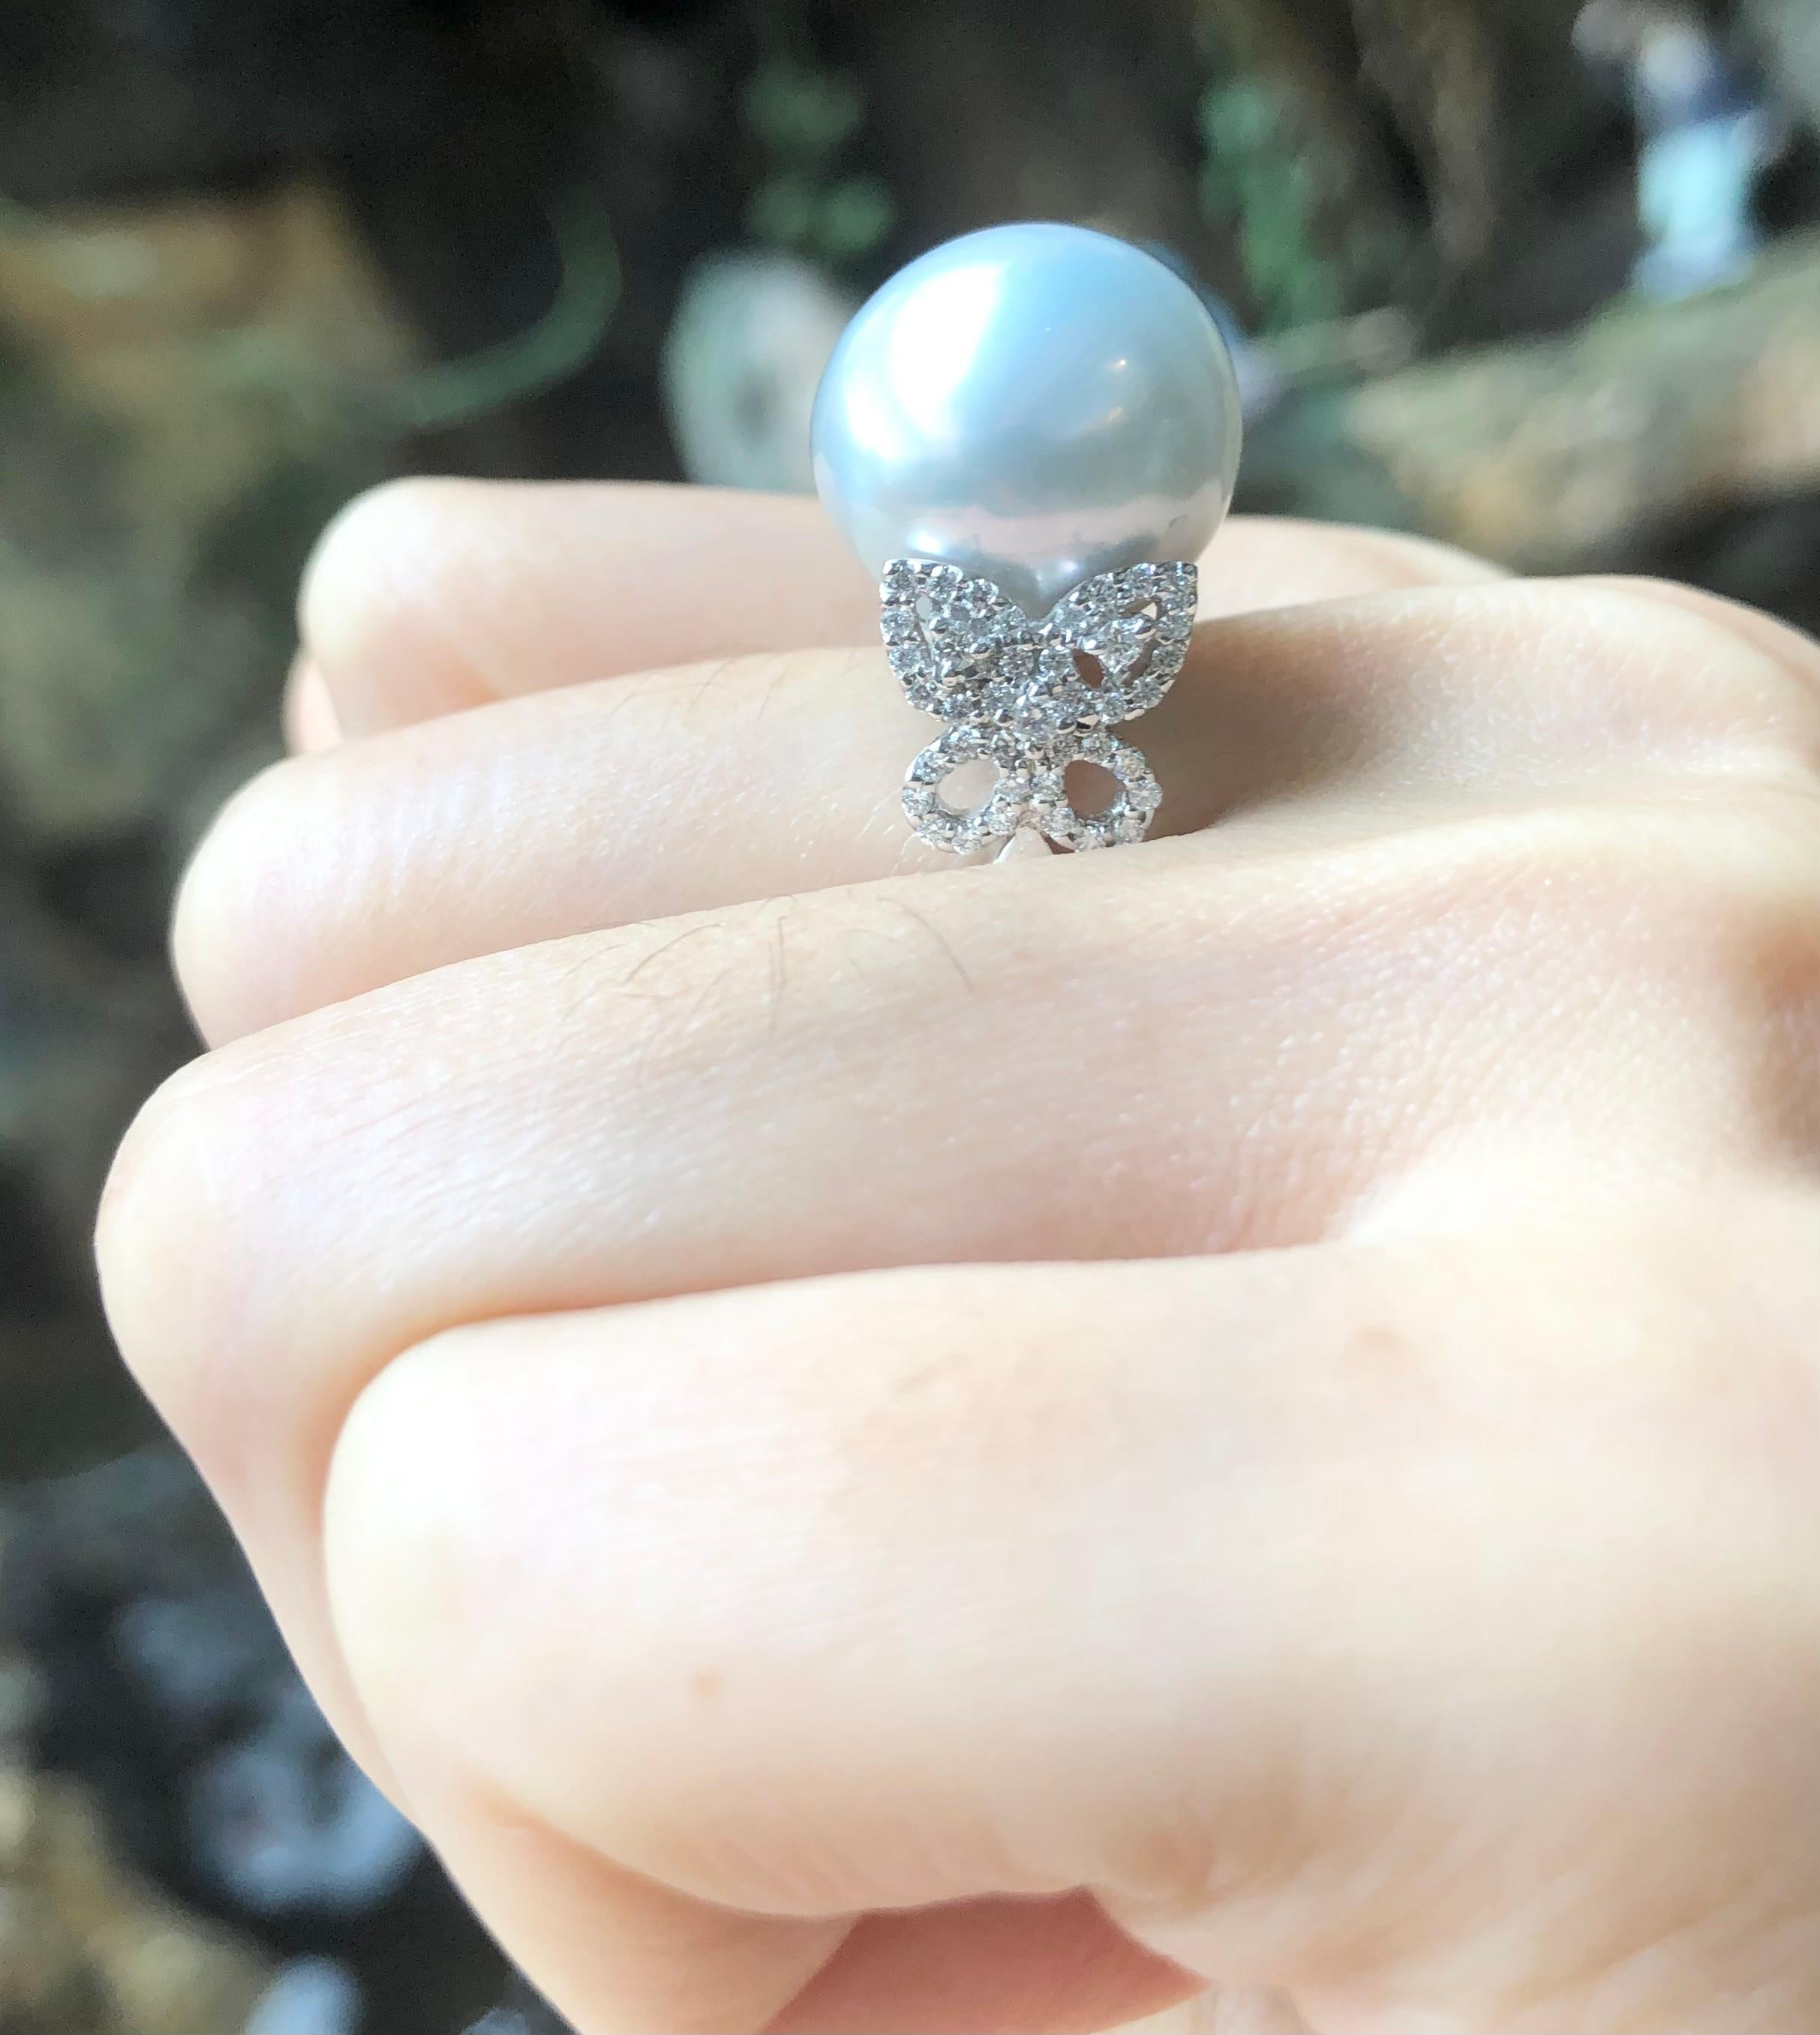 South Sea Pearl with Diamond 0.62 carat Ring set in 18 Karat White Gold Settings

Width:  1.7 cm 
Length: 1.4 cm
Ring Size: 52
Total Weight: 9.84 grams

South Sea Pearl: 14.6 mm

